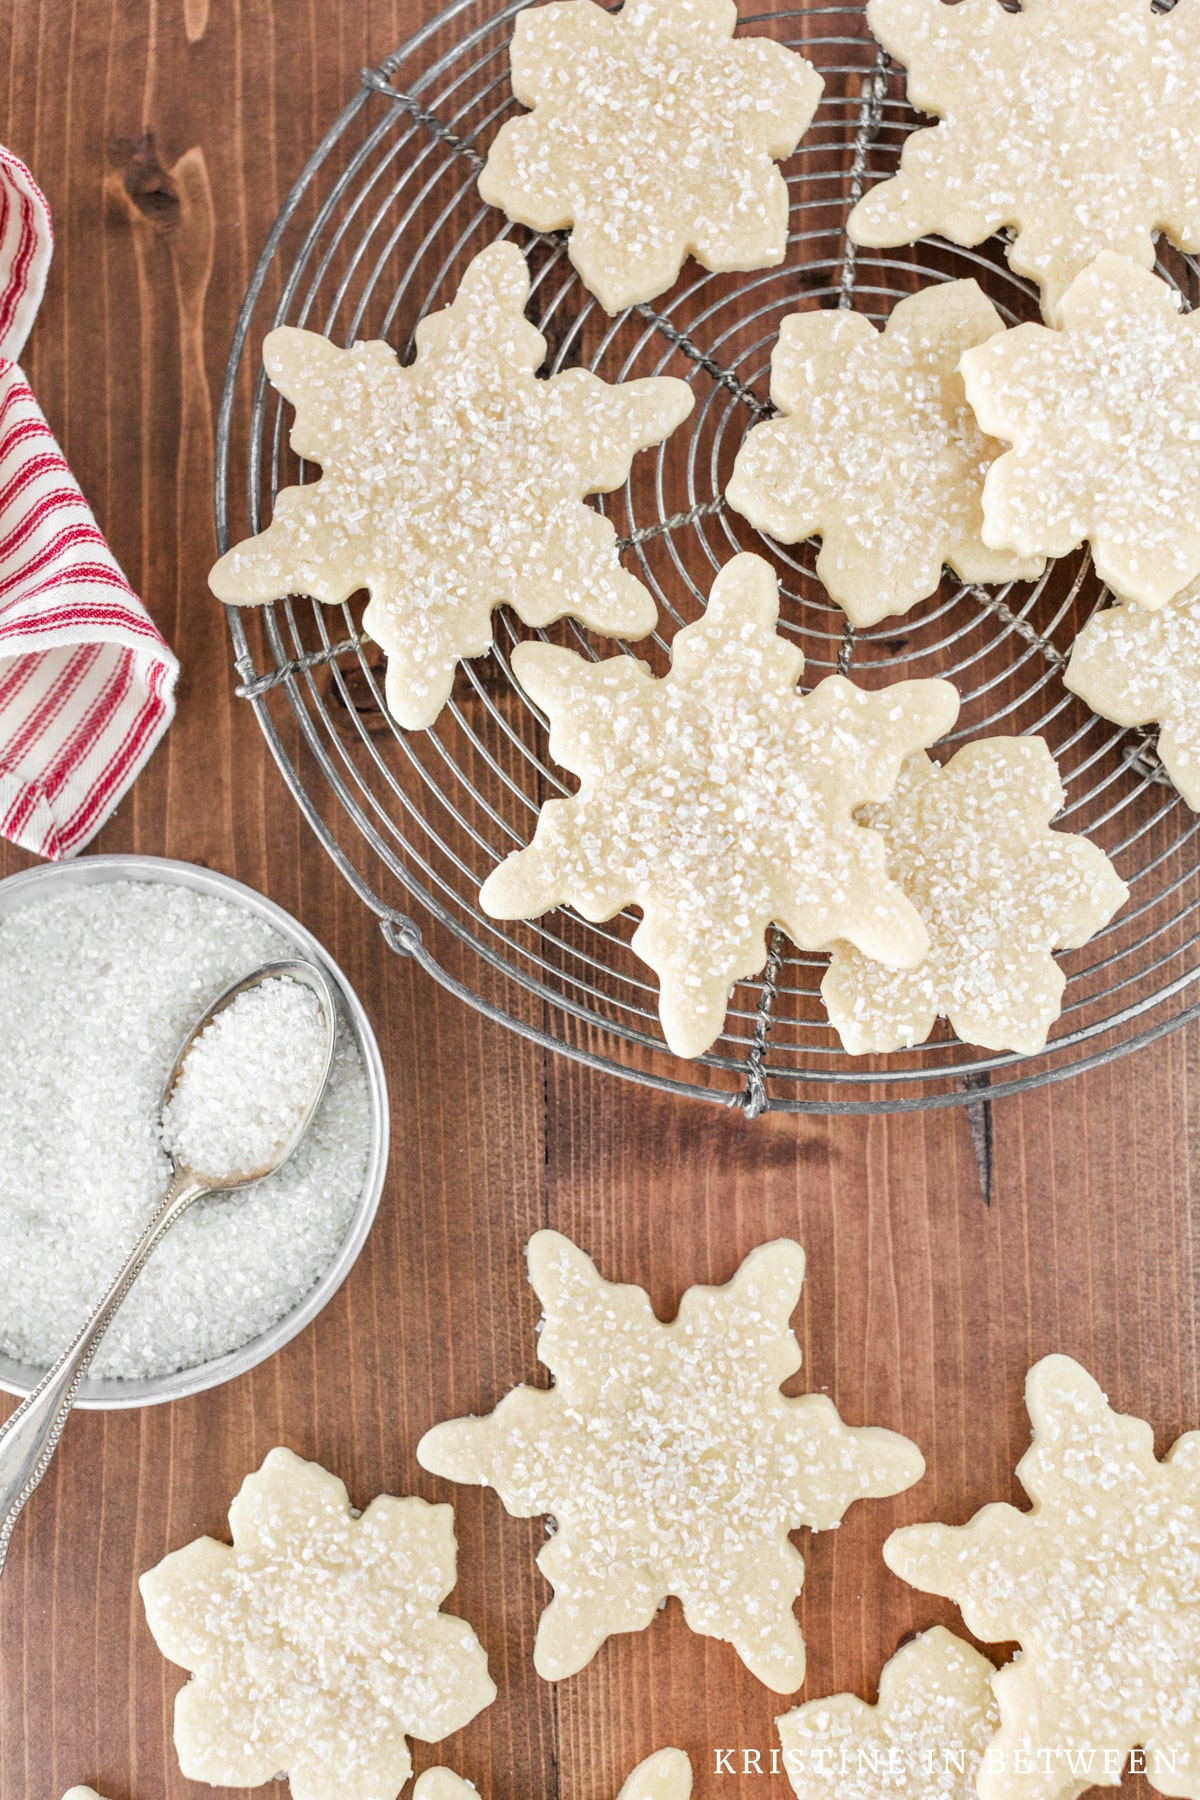 Cut out sugar cookies laying on a wooden table with a few on a circle rack and a bowl of sugar next to them.